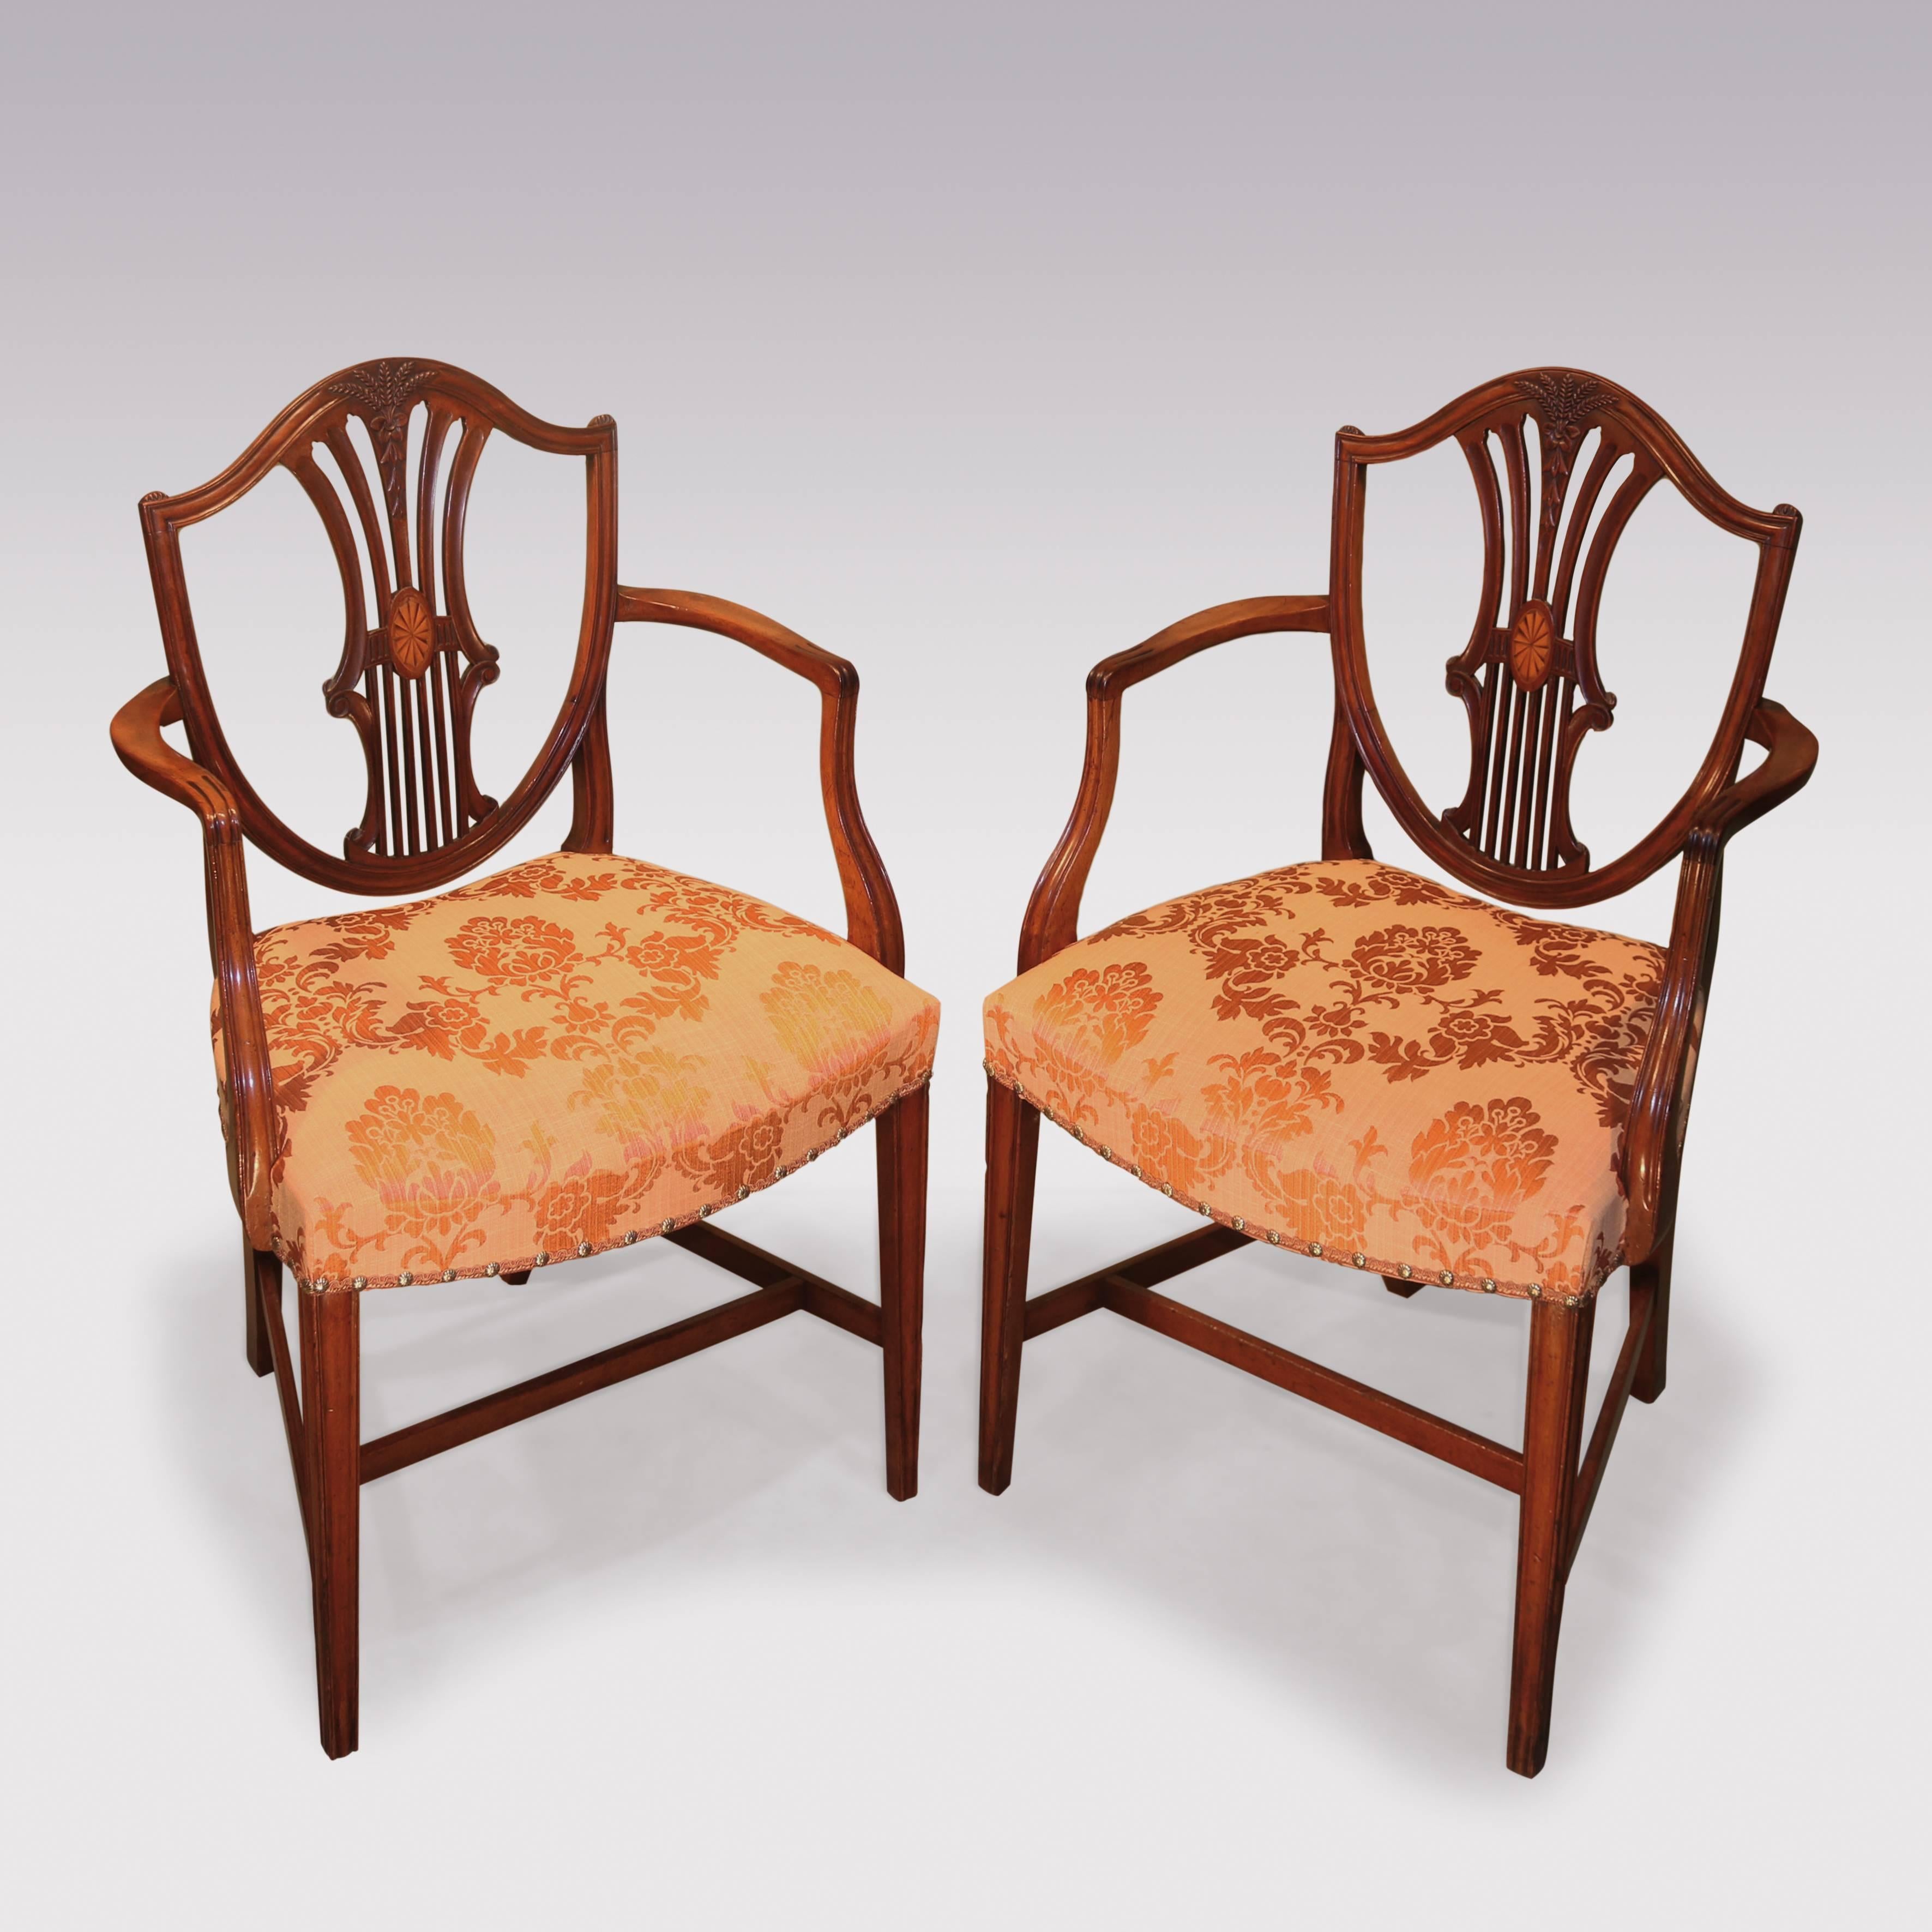 A matched set of eight single and two arm late 18th century Hepplewhite period mahogany dining chairs, having shield shaped backs with pierced slats, and wheat ear carving, above drop in seats supported on tapering legs.
The armchairs with boxwood